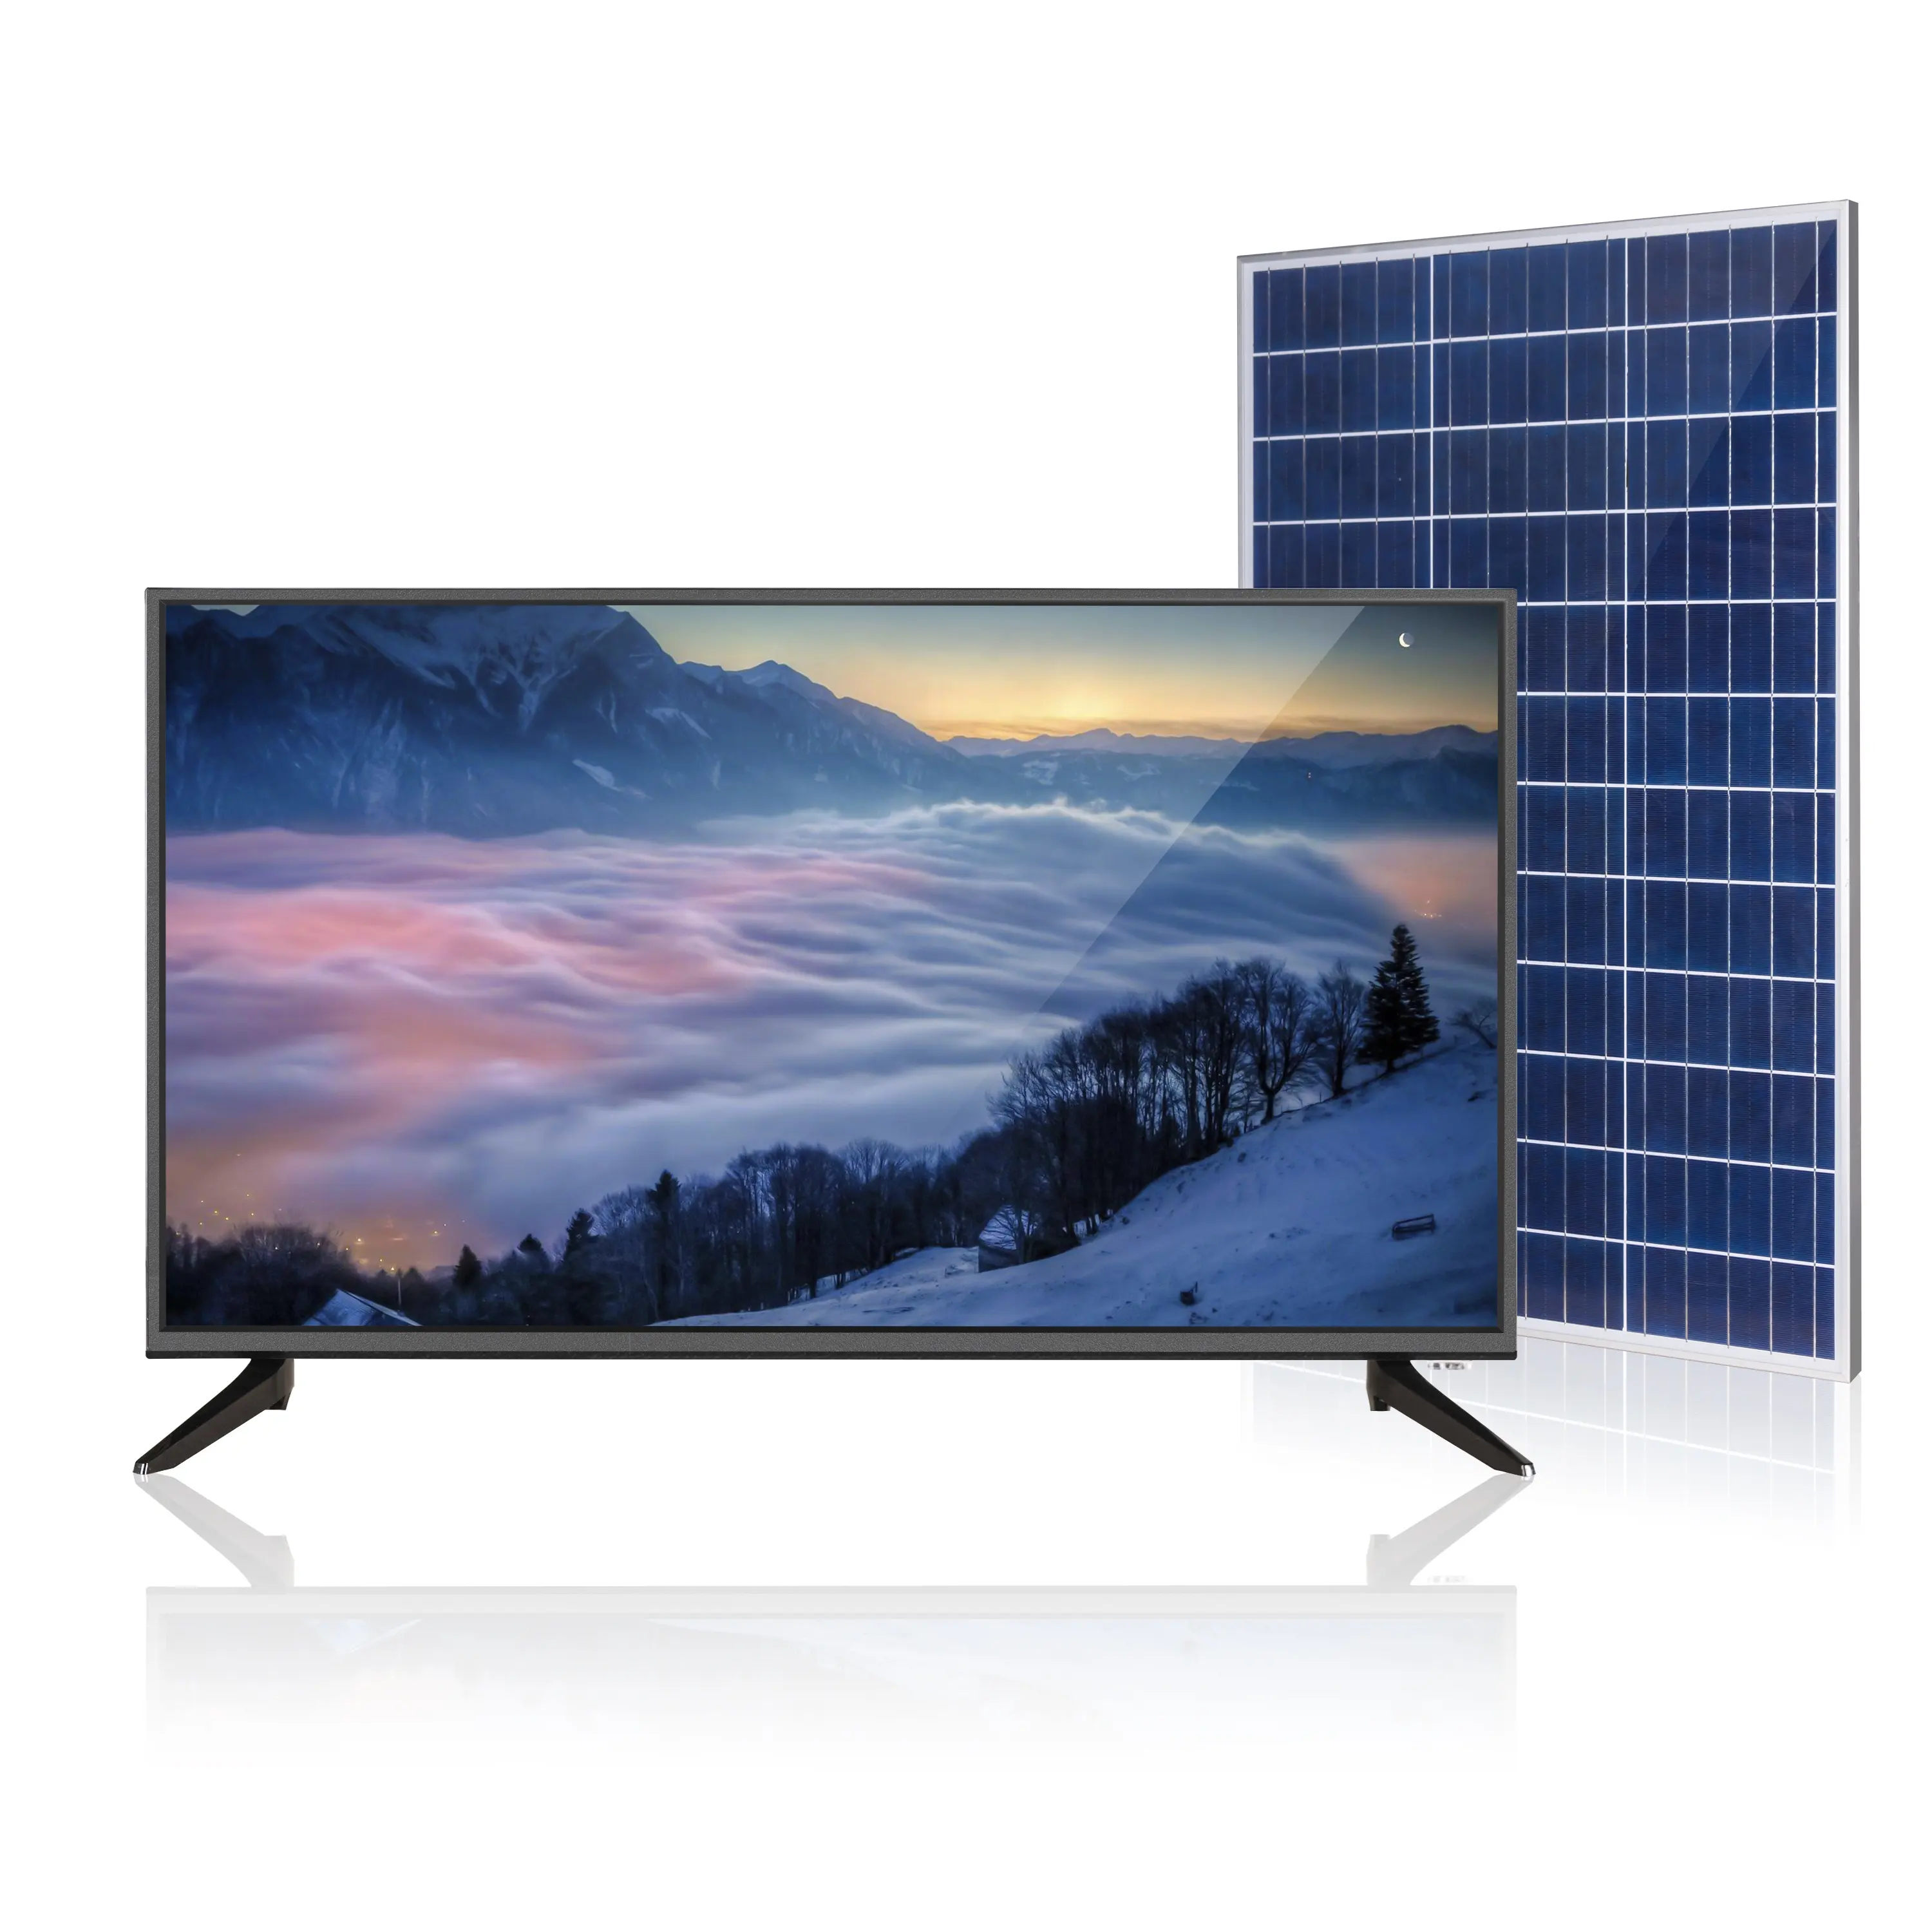 Rechargeable 32" solar tv with DVB T2/S2